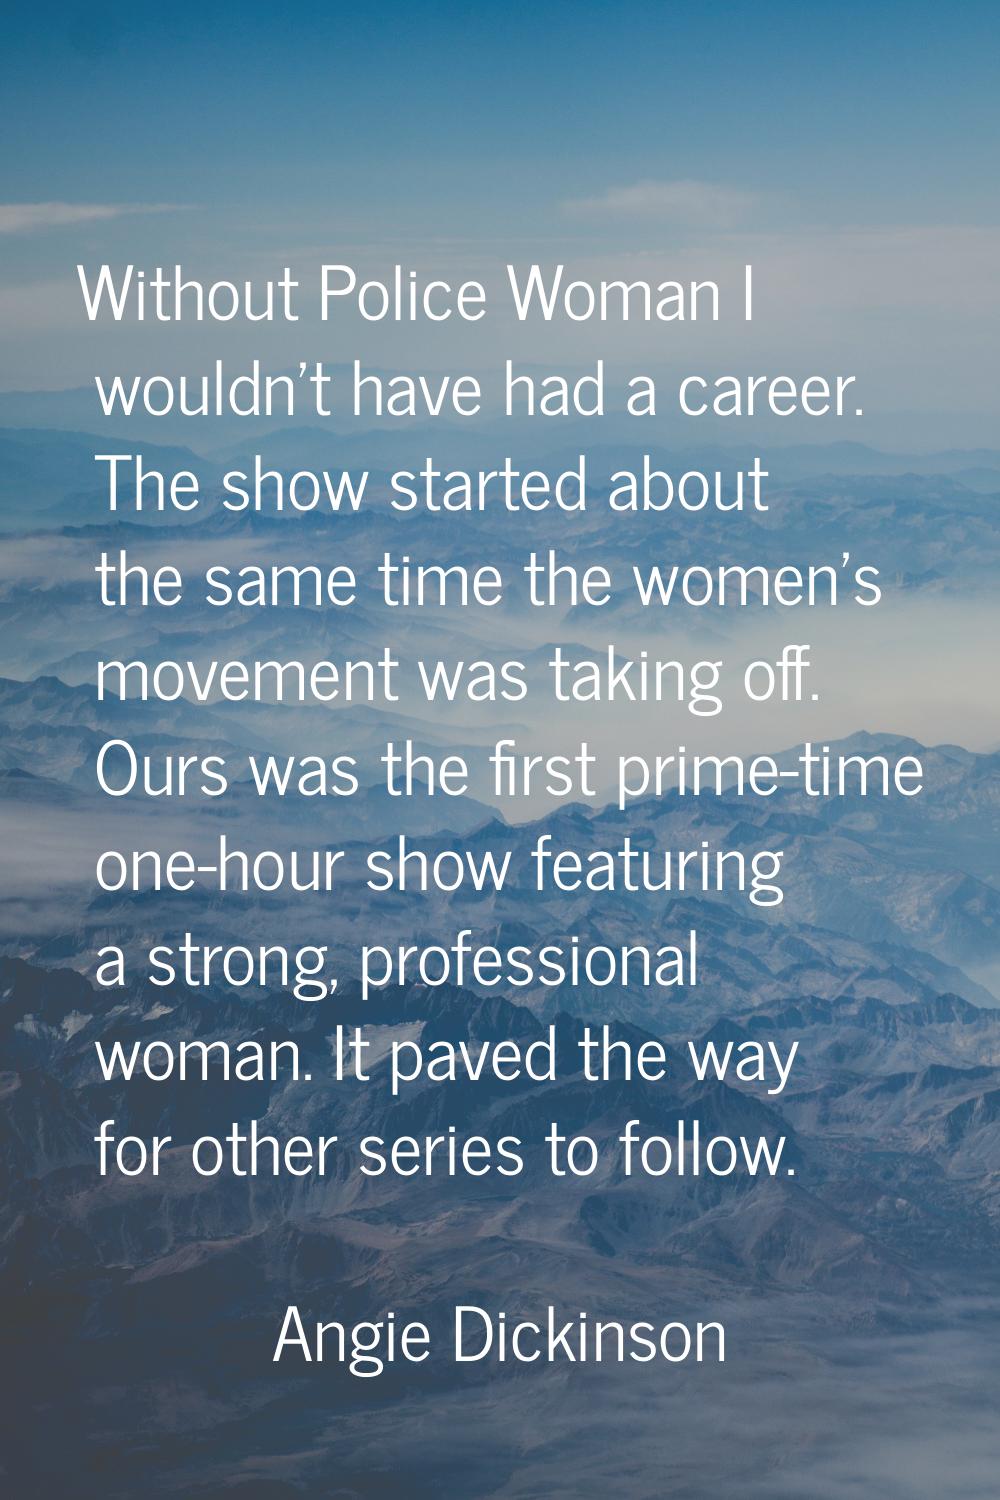 Without Police Woman I wouldn't have had a career. The show started about the same time the women's